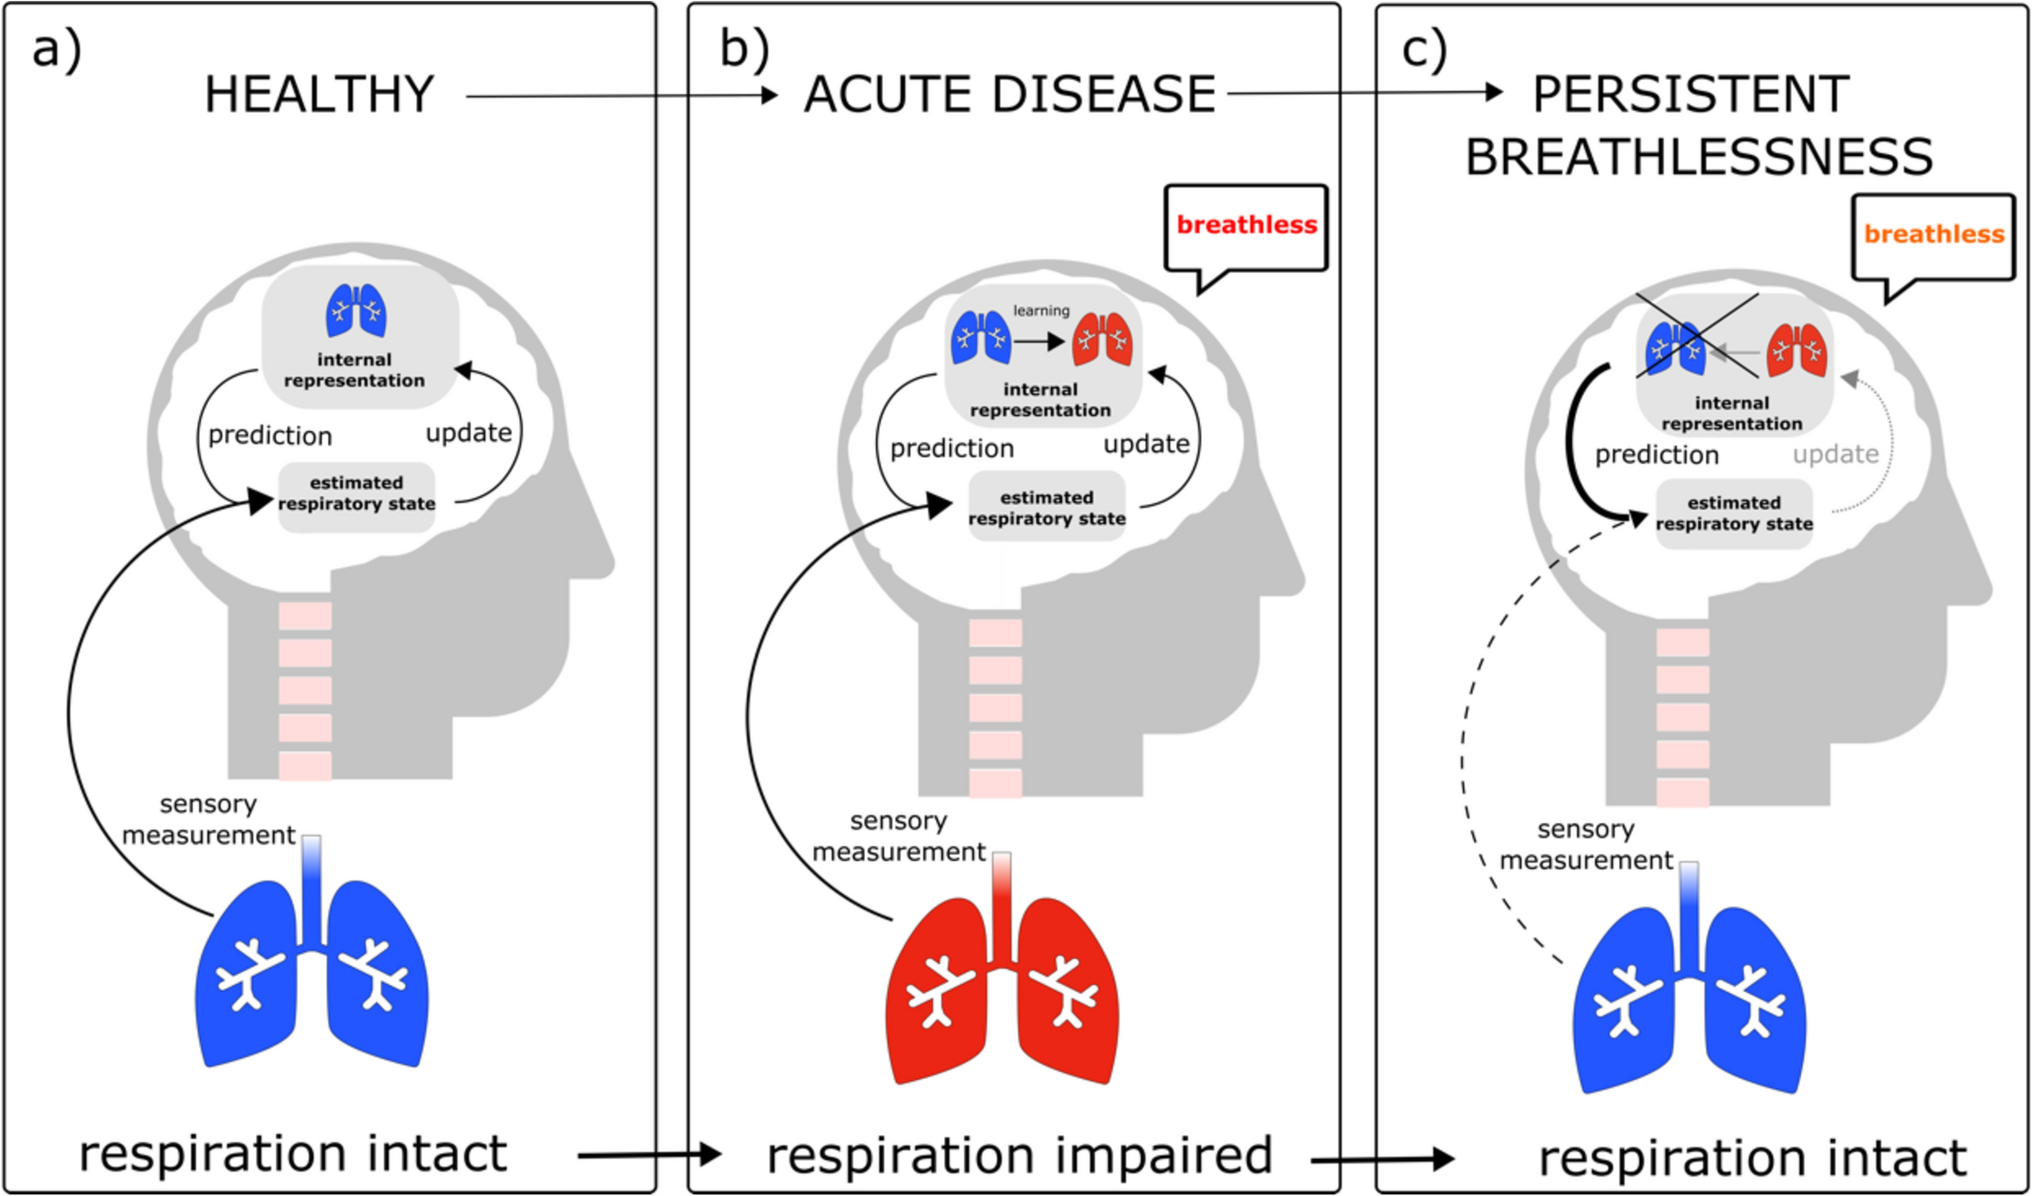 Post-COVID breathlessness: a mathematical model of respiratory processing in the brain